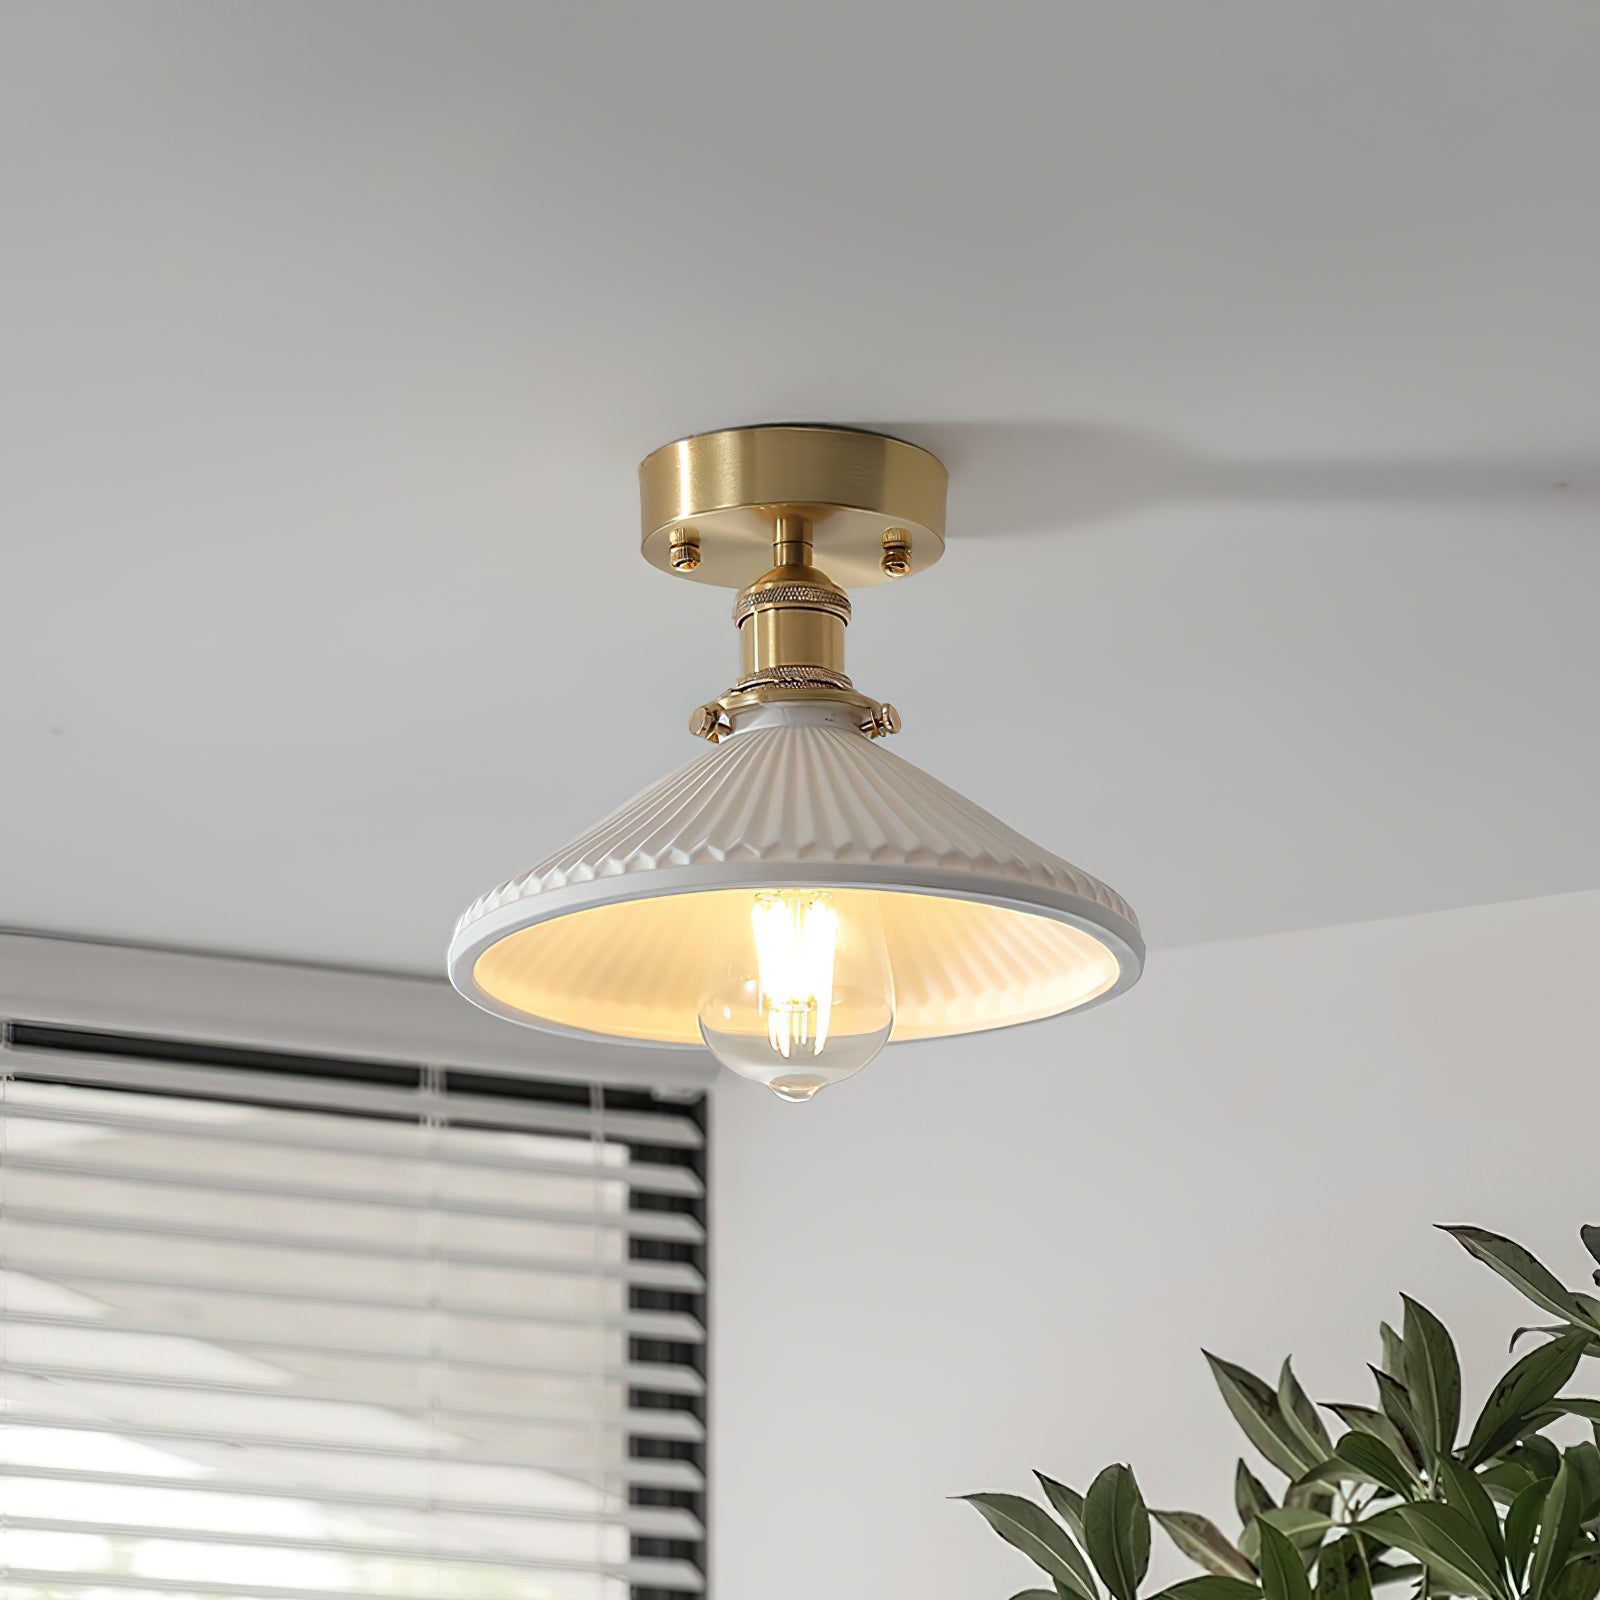 A Classic Comeback: Vintage Ceiling Lamps for a More Charming Home